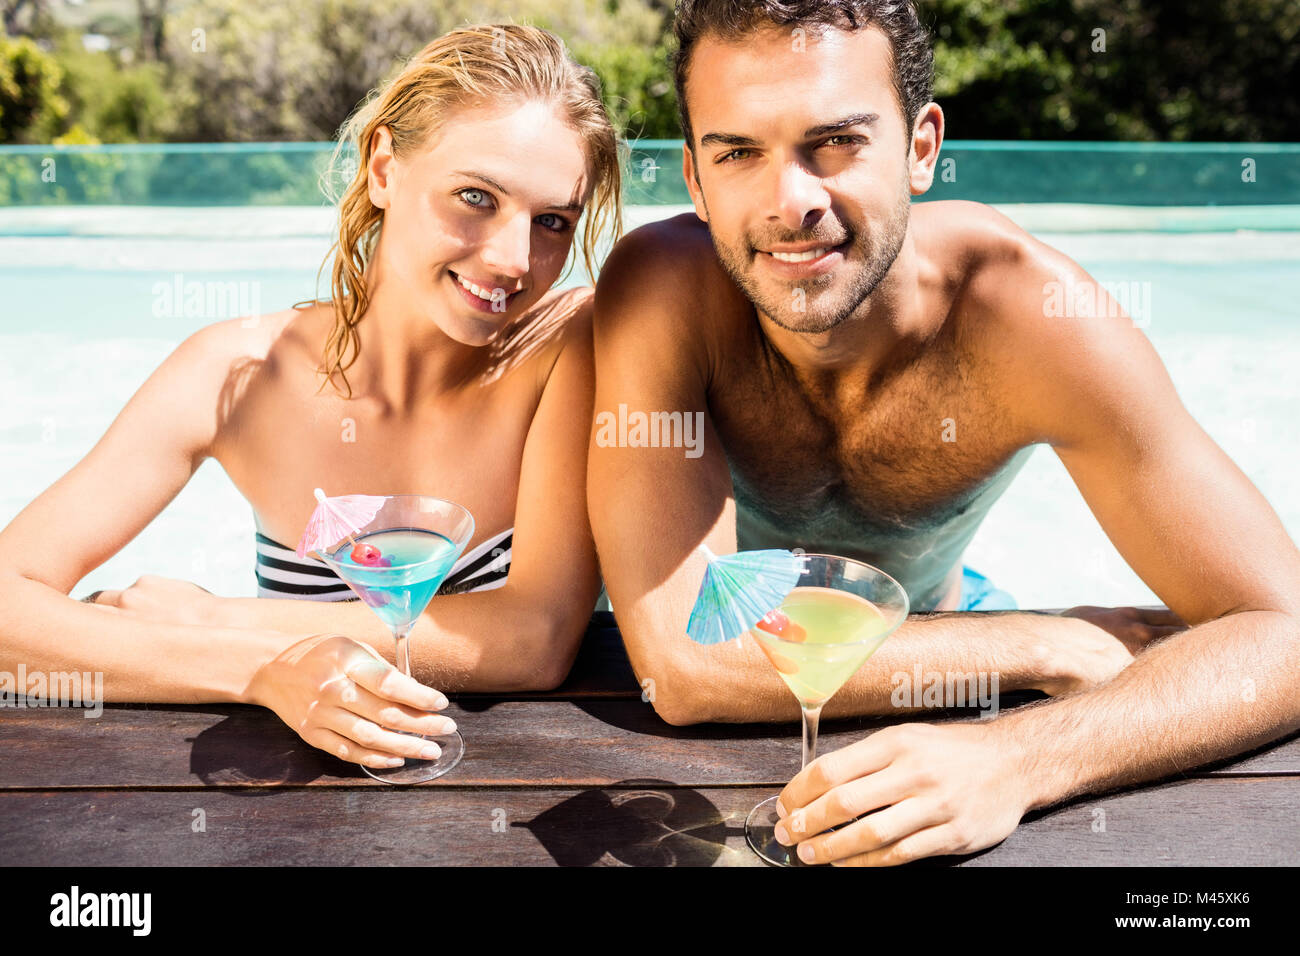 Couple in Swimwear Holding Alcohol Cocktails Near Swimming Pool Stock Photo  - Image of cocktails, muscular: 191786550